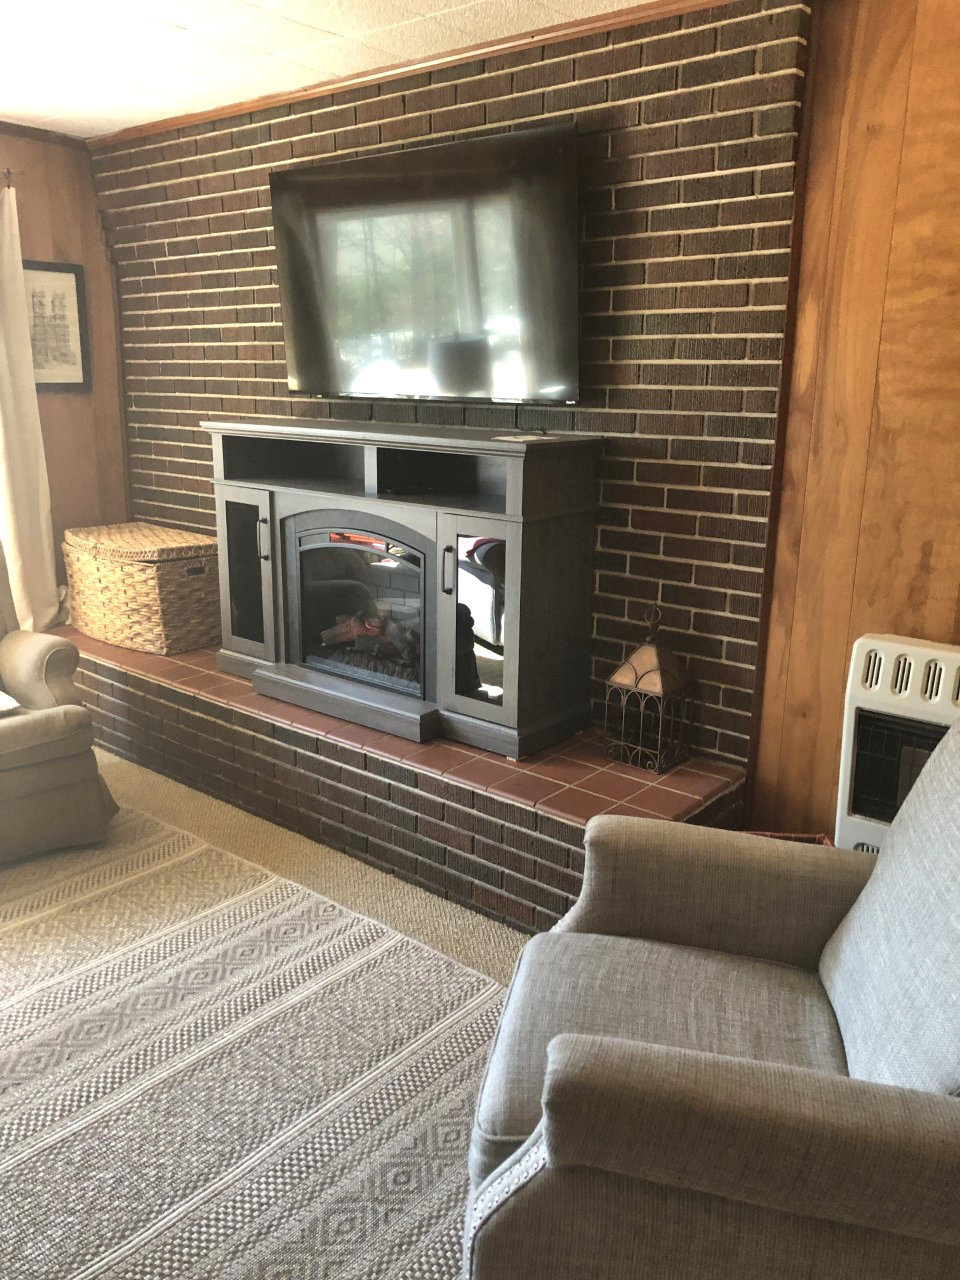 Reader Question: How Do I Handle My Wood Paneled Walls And Dark Brick Fireplace?